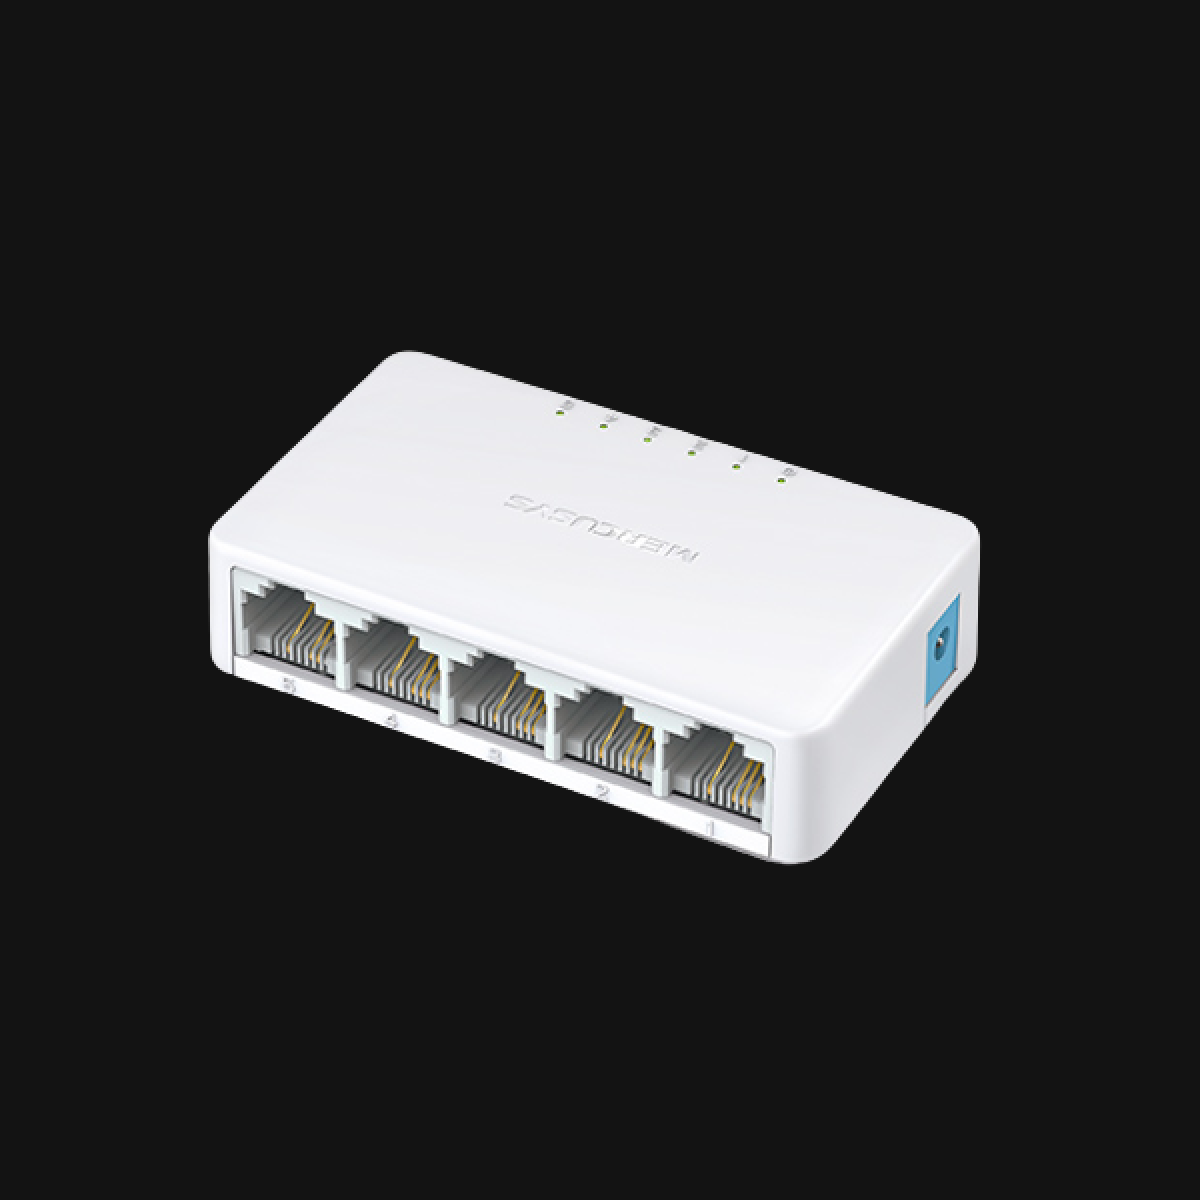 MS105  5-Port 10/100Mbps Desktop Switch - Welcome to MERCUSYS